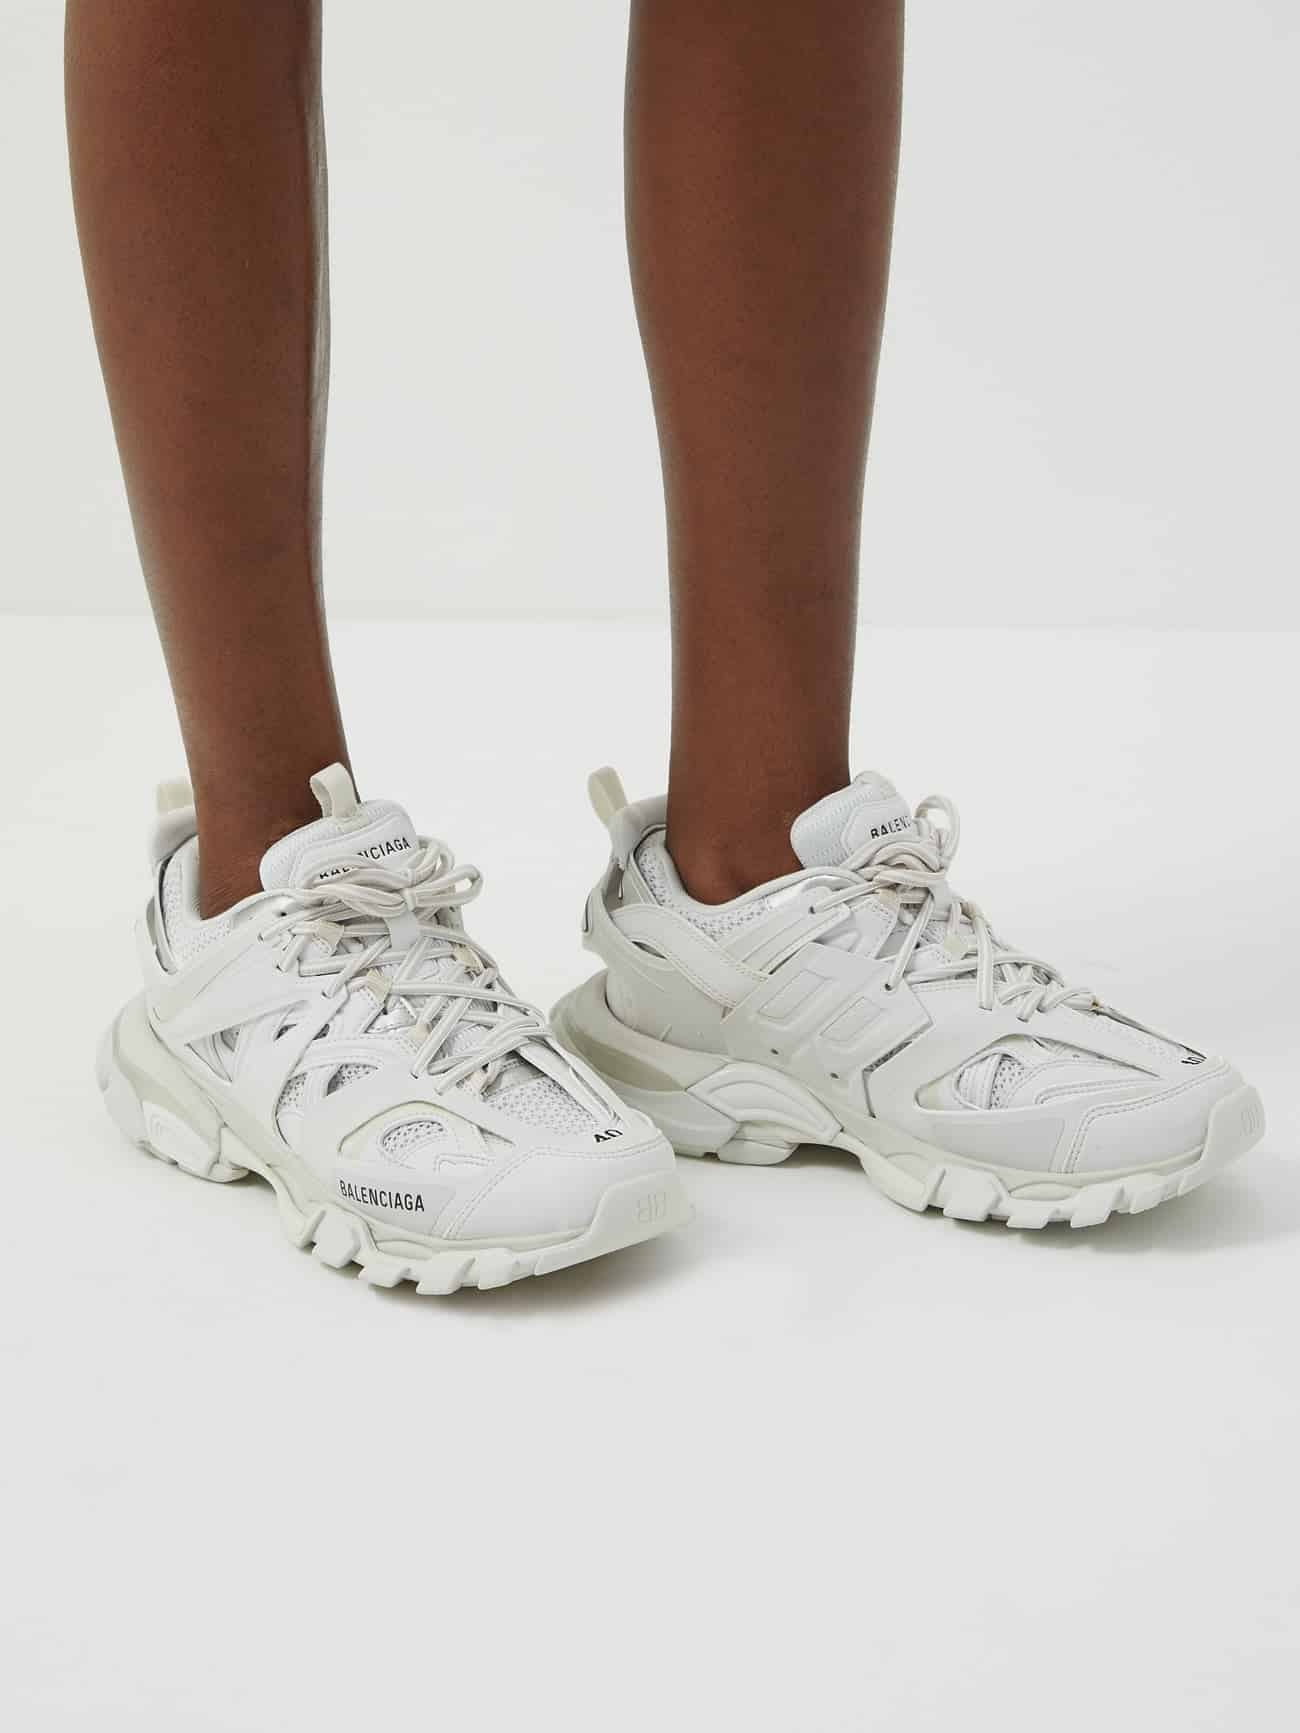 Balenciaga Track panelled trainers white for sale - Perfect Shoes